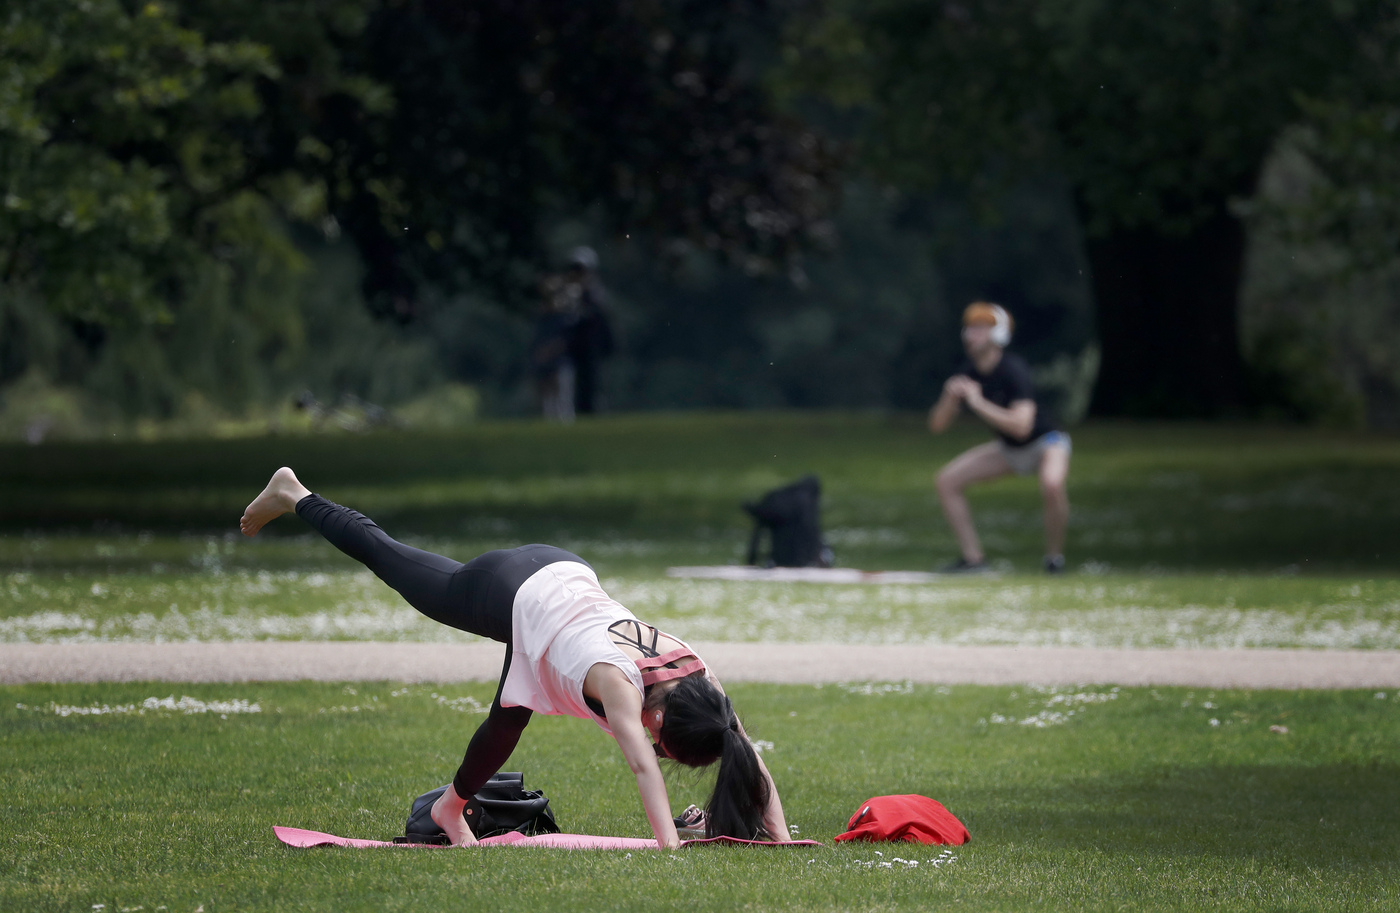 People exercise in St James Park in London, Sunday, May 10, 2020 during the nation-wide coronavirus lockdown. Personal exercise while observing social distancing measures is allowed under government lockdown guidelines. (AP Photo/Frank Augstein)